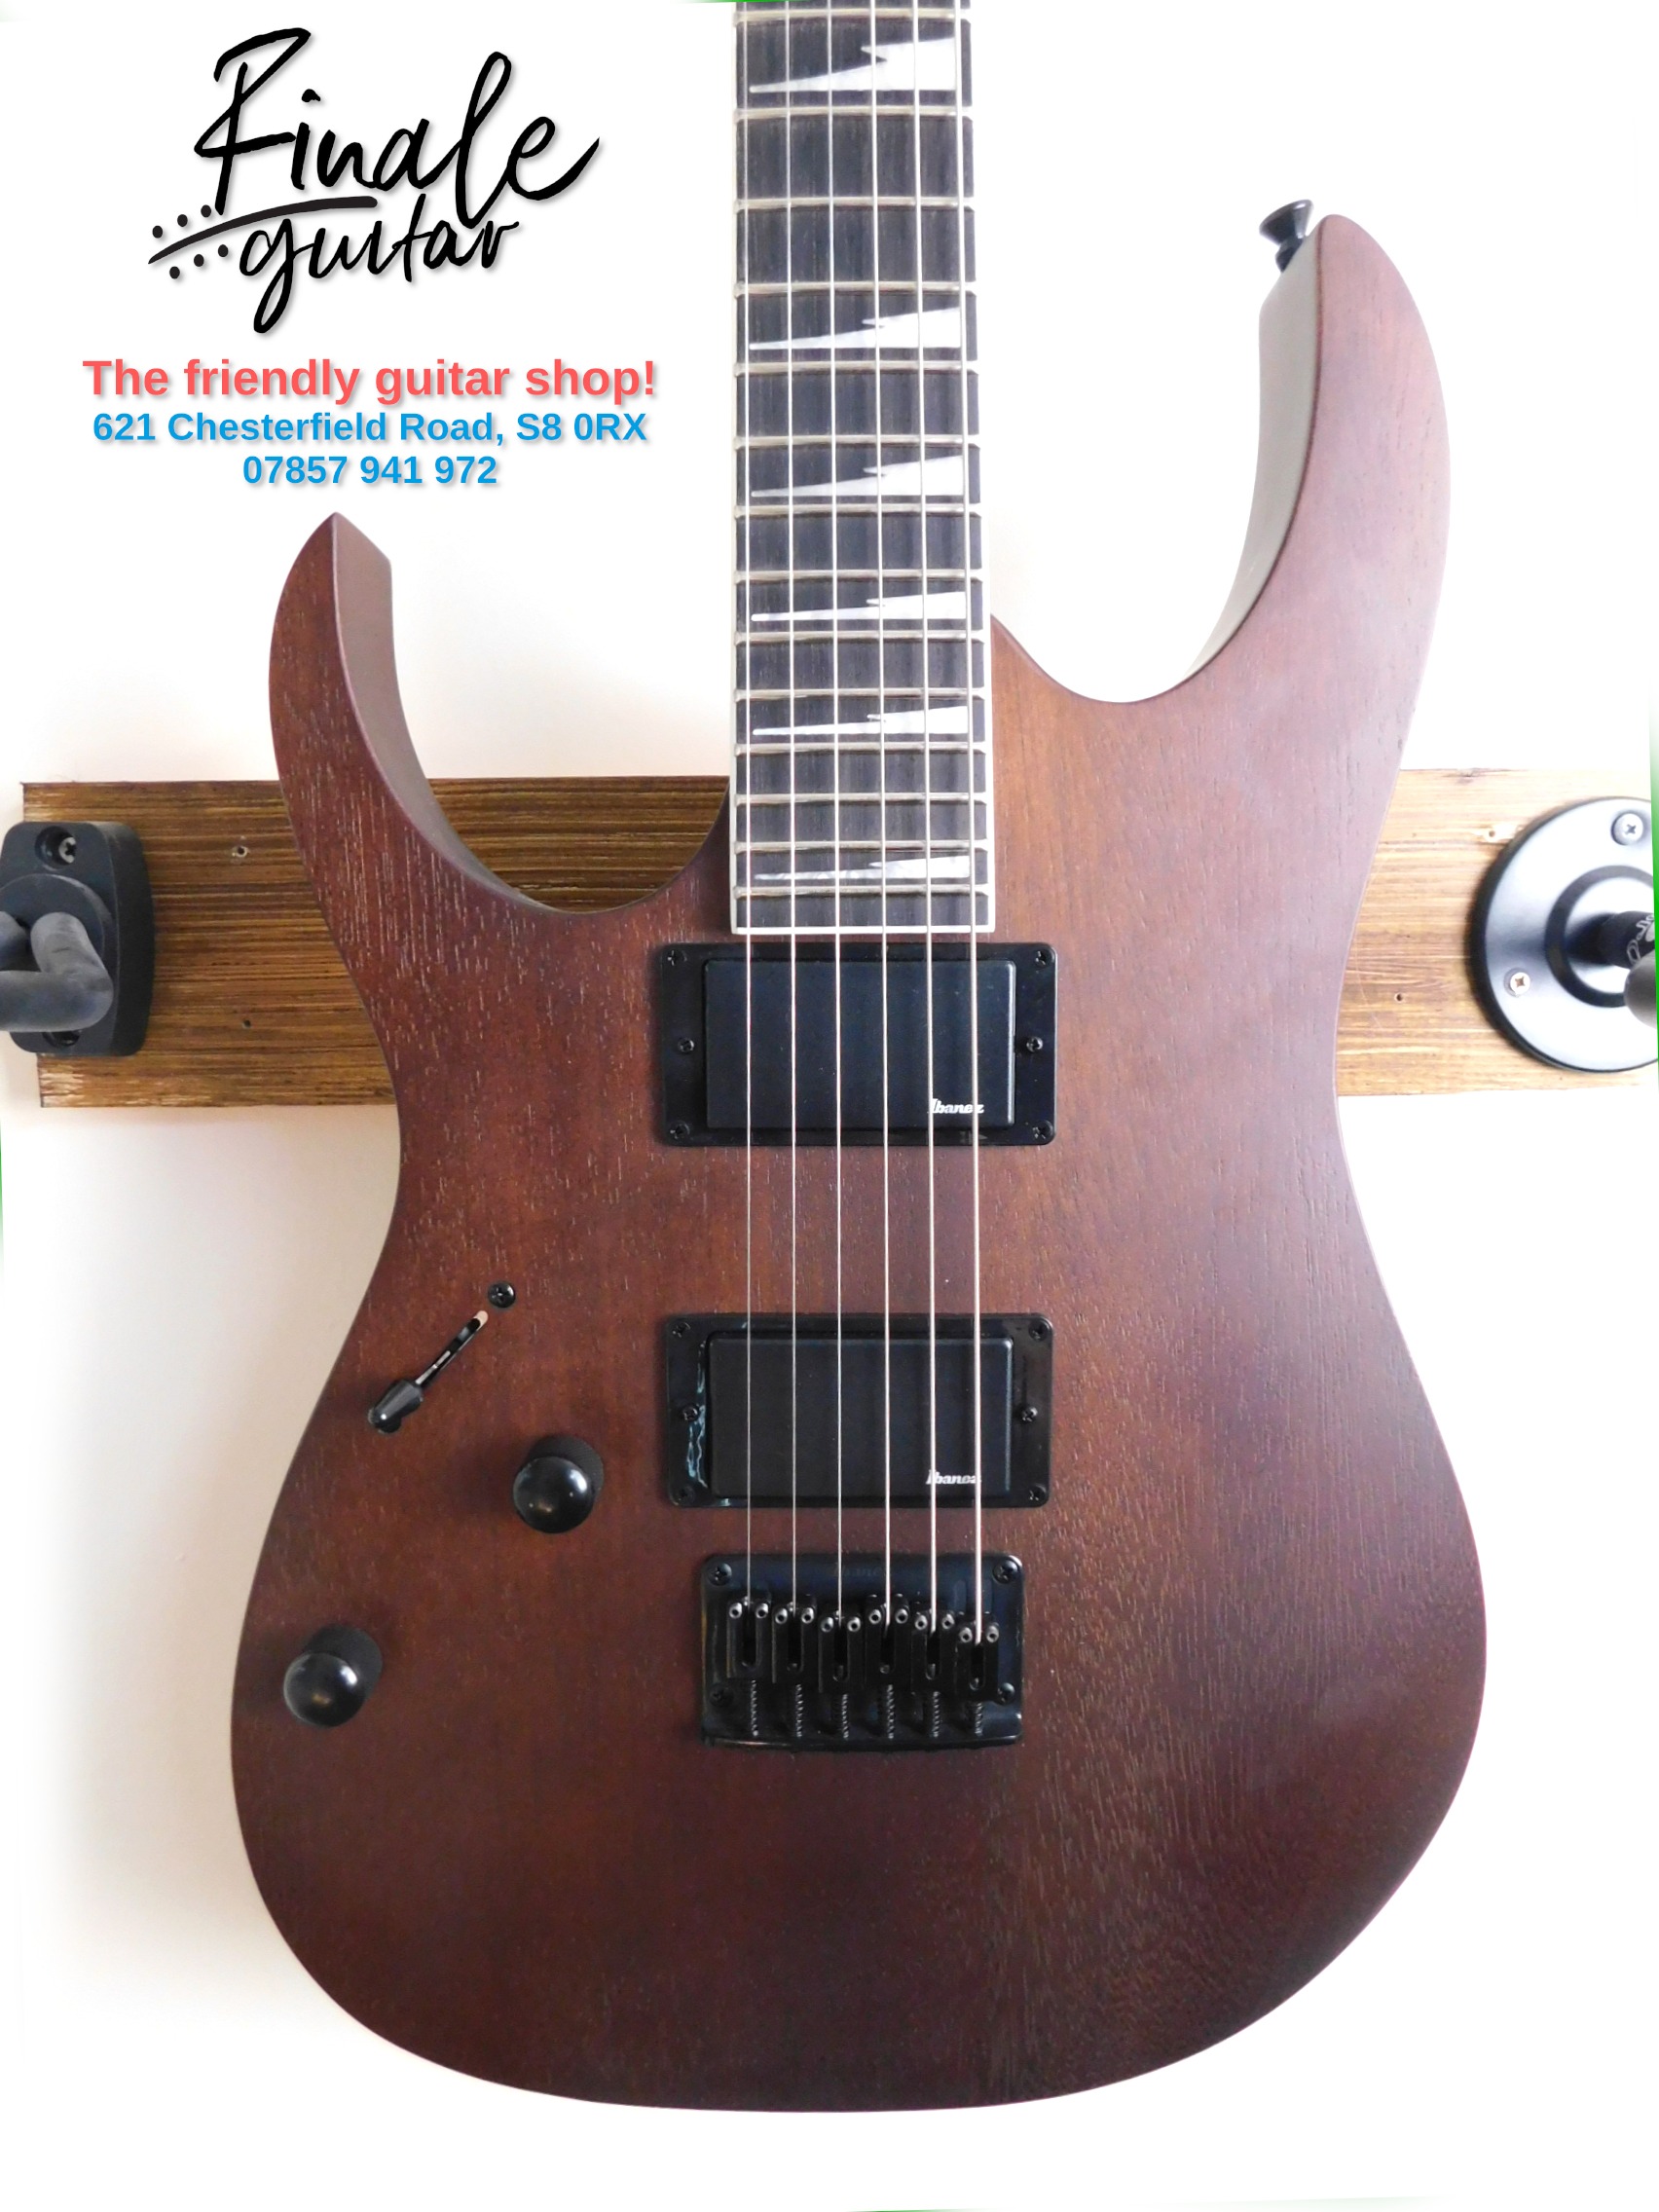 Left handed Ibanez Gio electric guitar for sale in our Sheffield Guitar shop, Finale Guitar